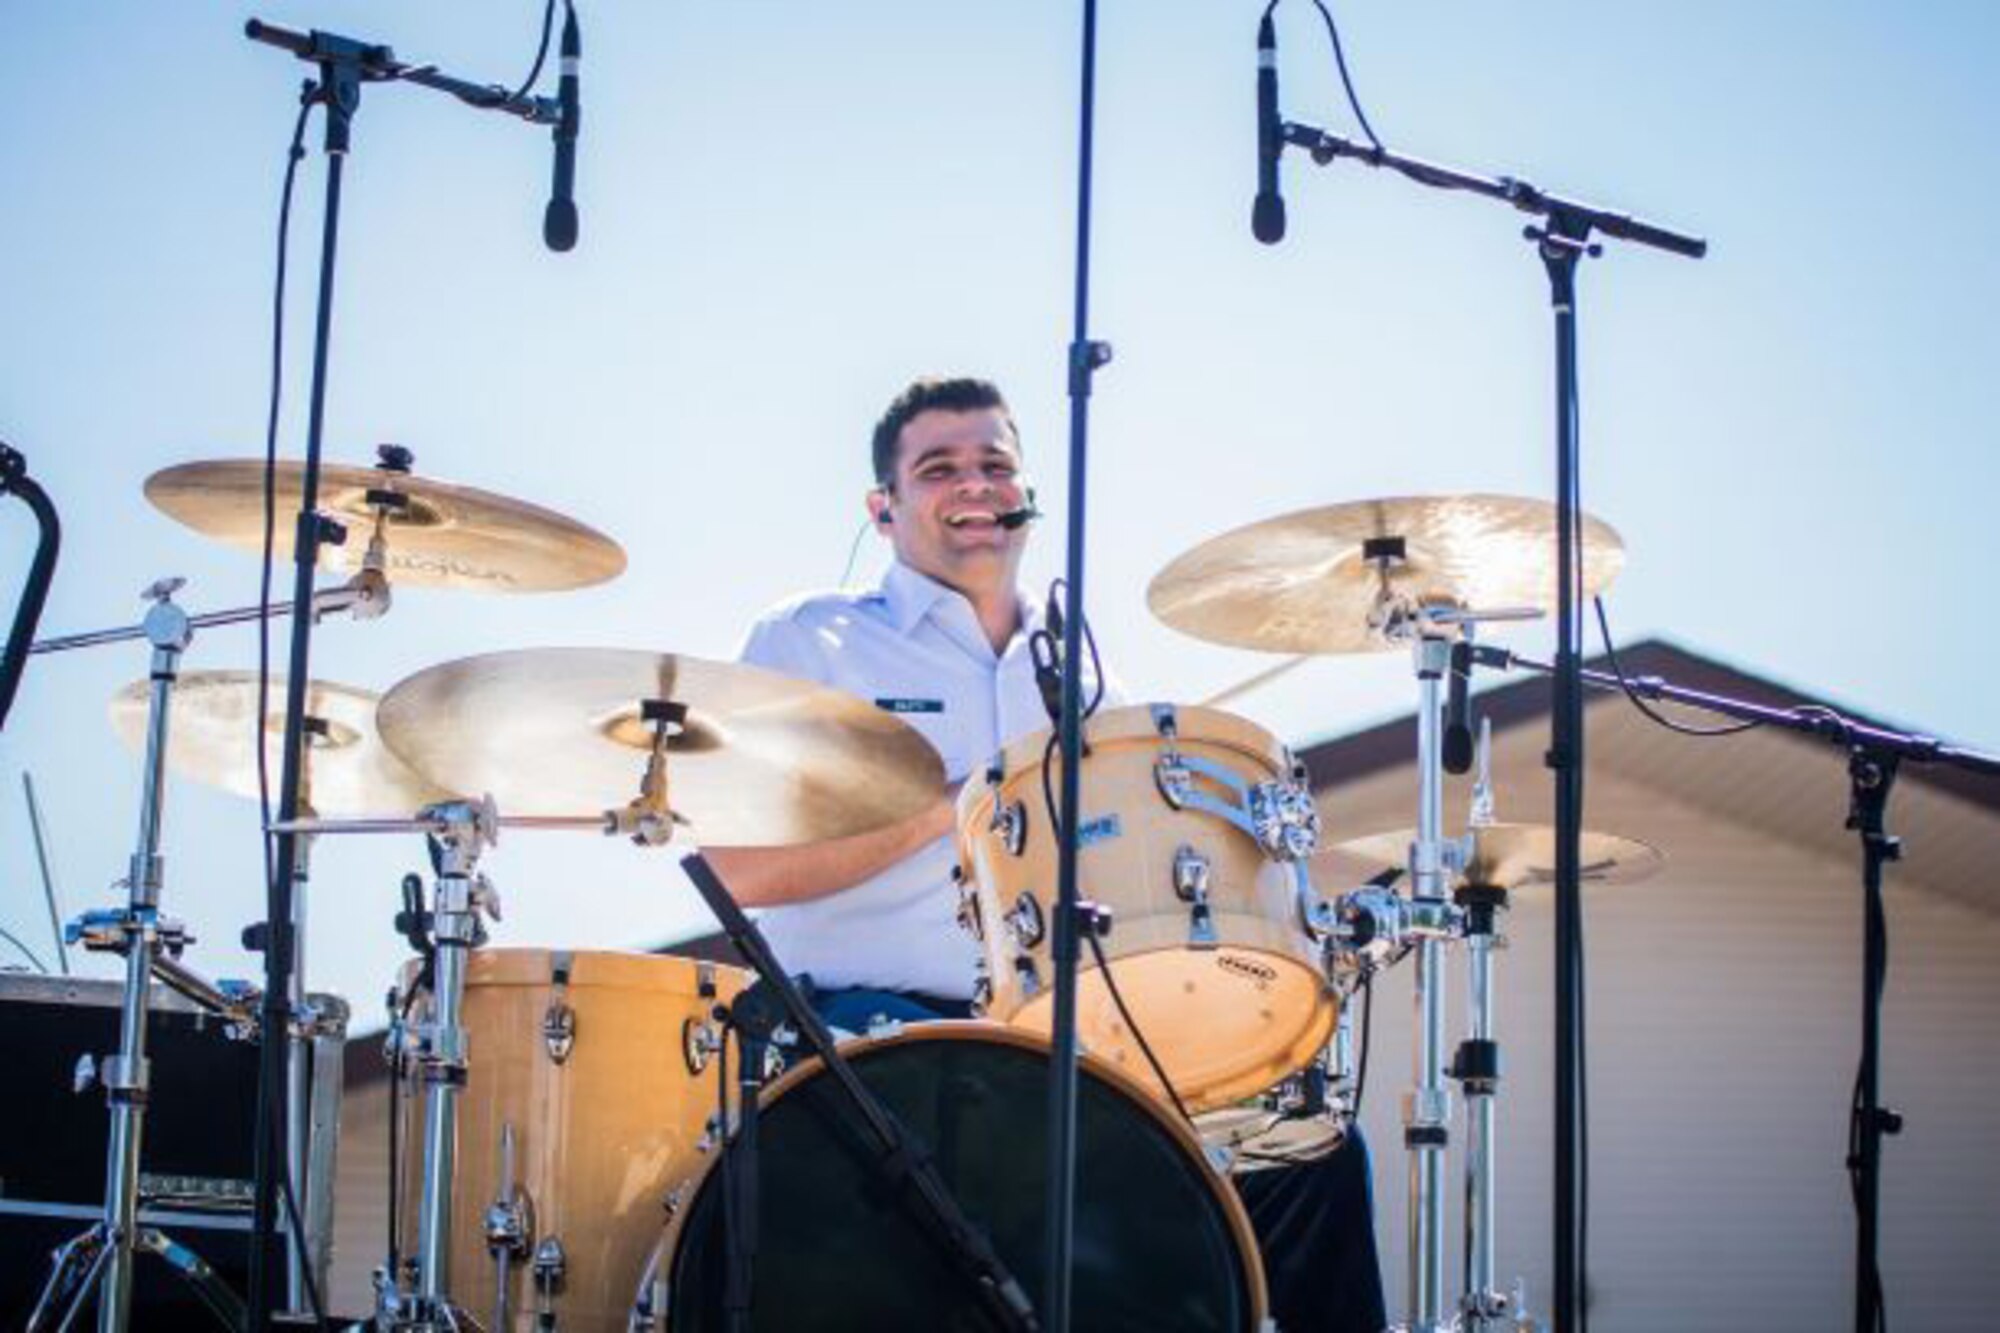 An Air Force musician joyfully performs on a drum set in a light blue uniform outdoors as part of a country band concert.